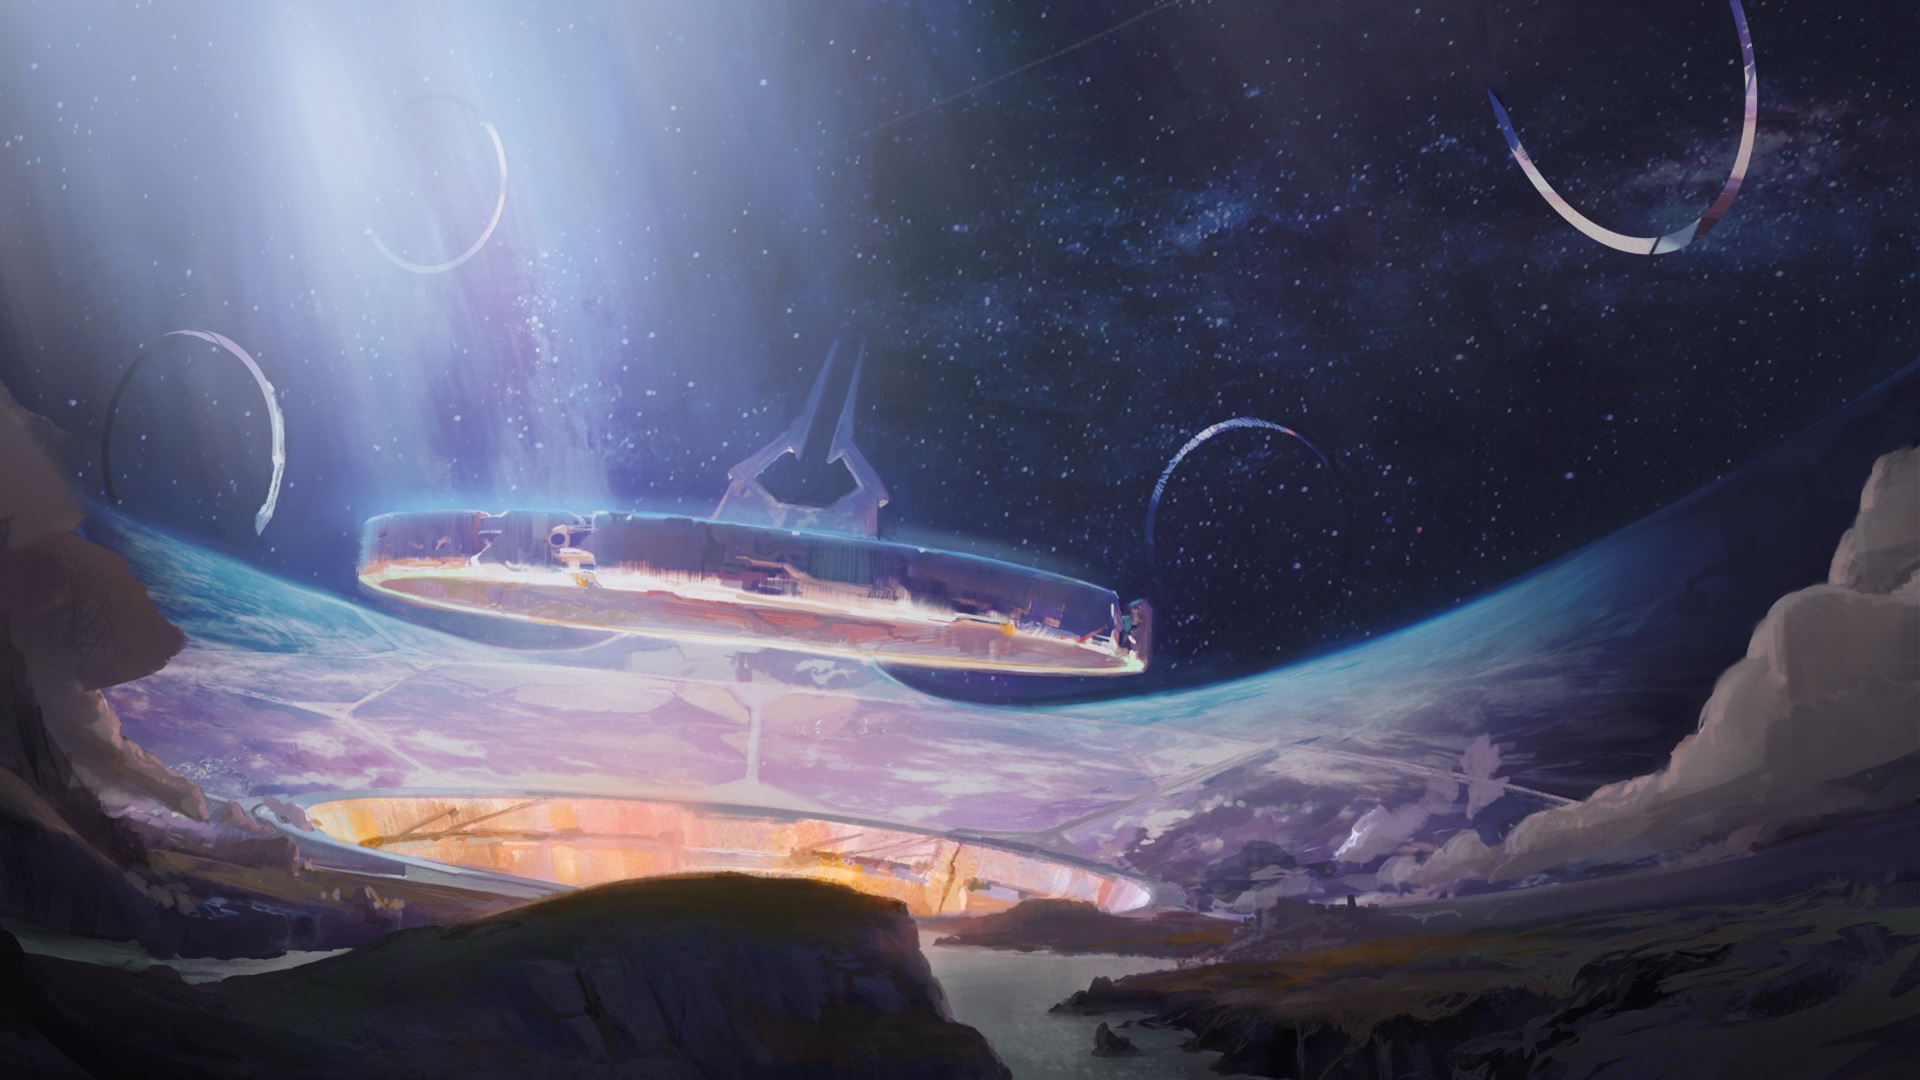 Header image for the September community update showing the senescent Ark from Halo Mythos